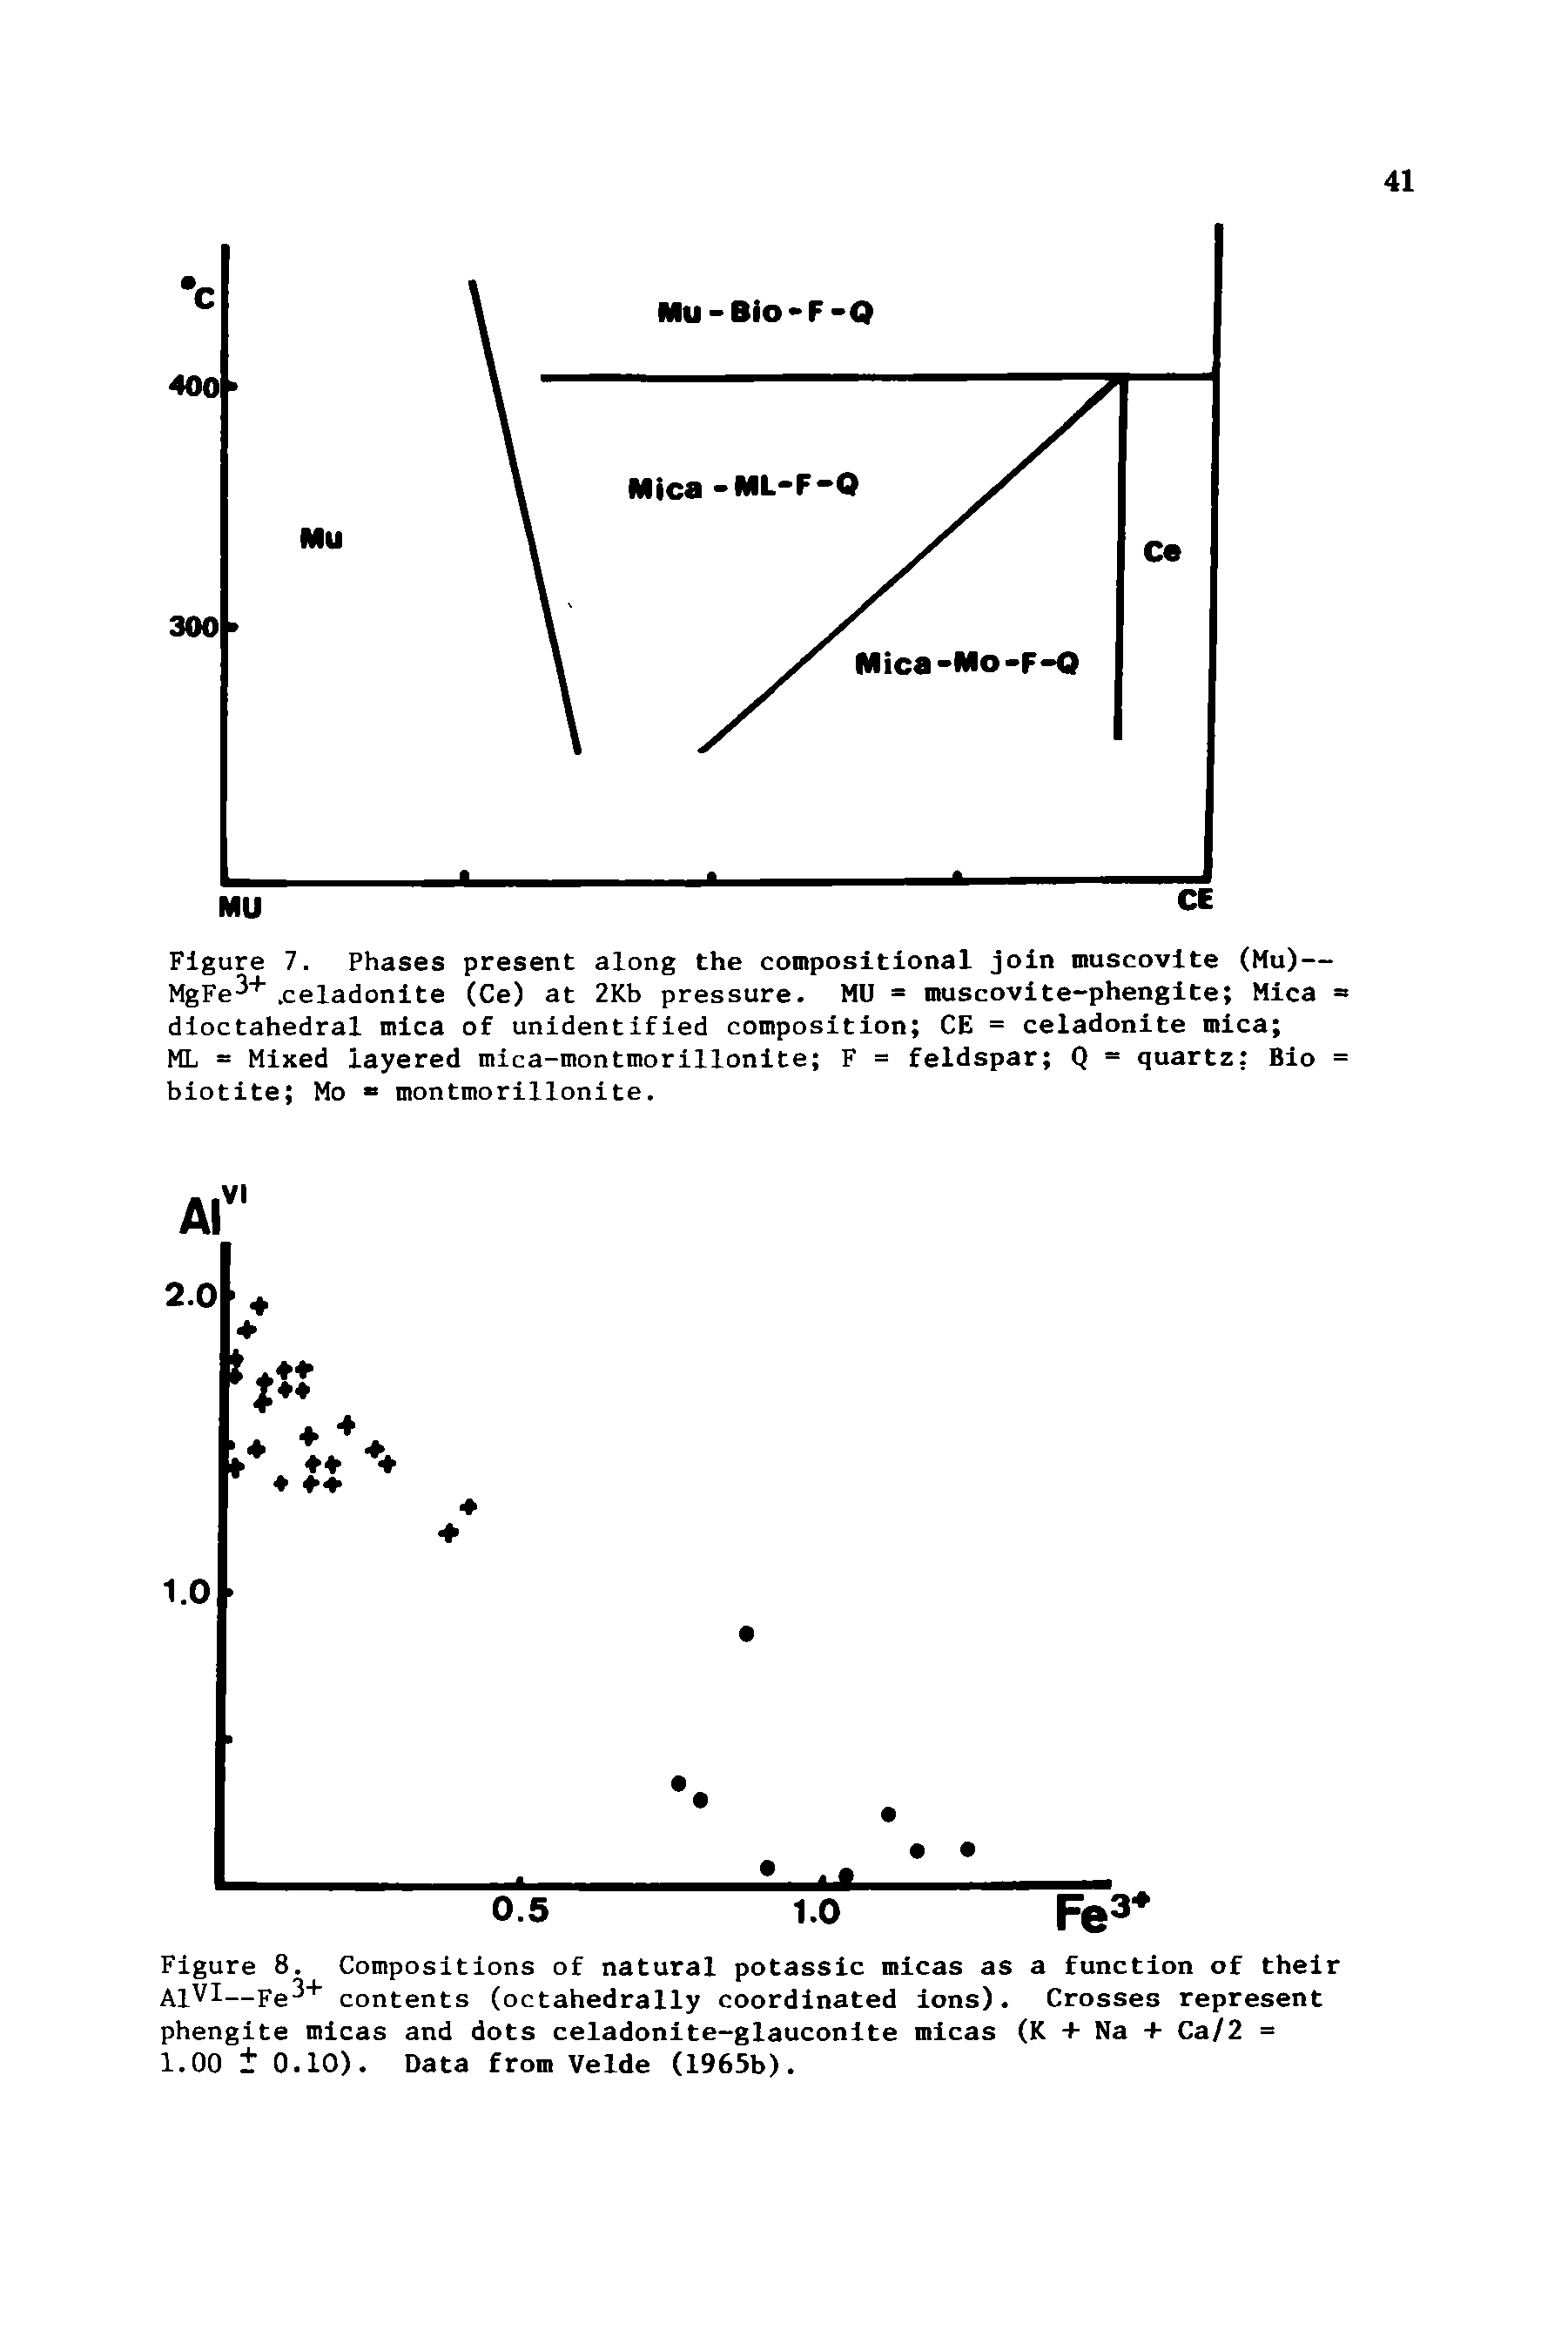 Figure 7. Phases present along the compositional join muscovite (Mu)— MgFe +. celadonite (Ce) at 2Kb pressure. MU = muscovite-phengite Mica = dioctahedral mica of unidentified composition CE = celadonite mica ...